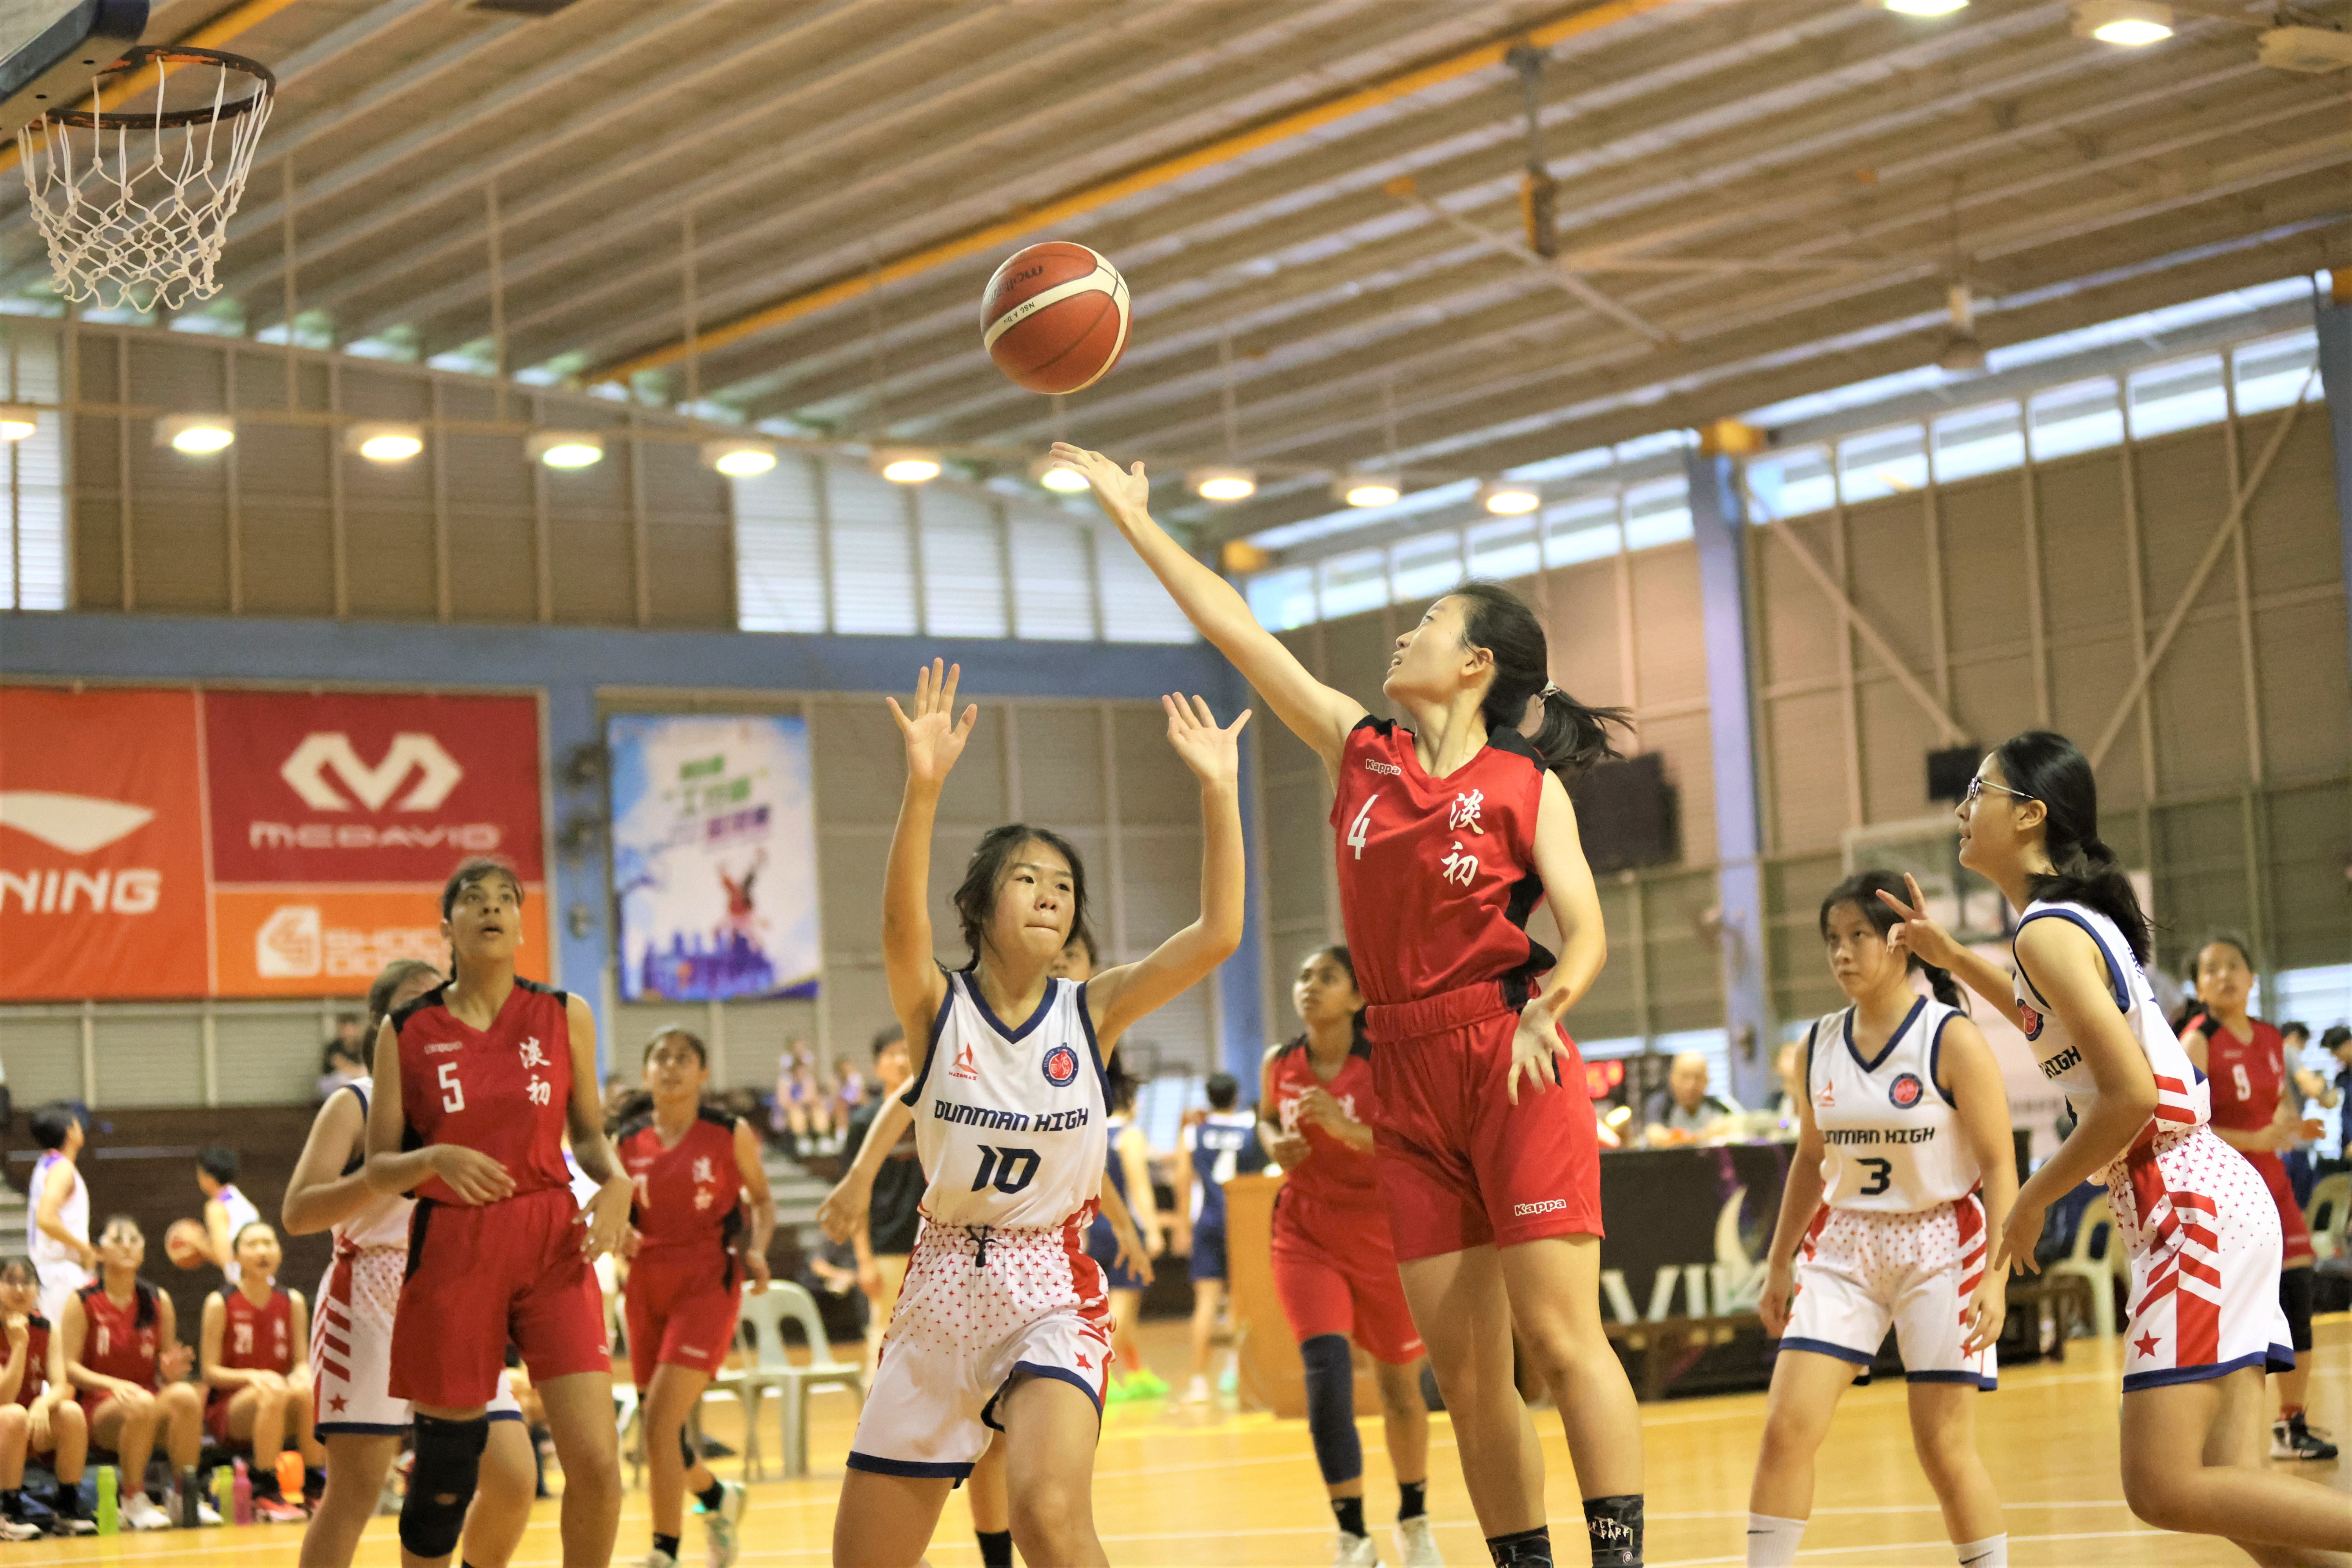 NSG 2023 Basketball : Highlights from Dunman High School vs Temasek JC in the A Division Prelim stage!